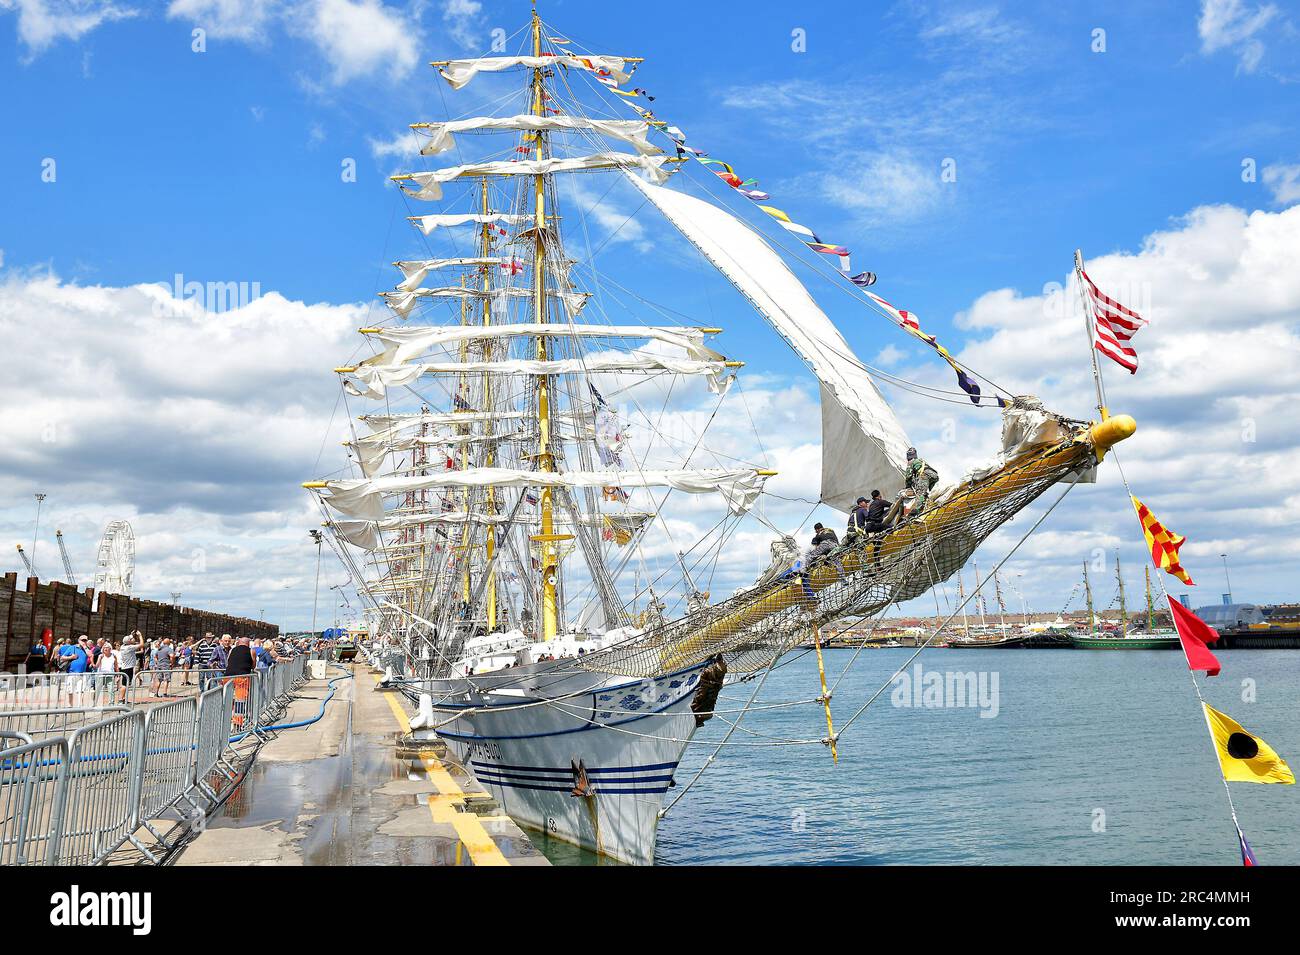 Hartlepool's 2023 Tall ships race, taking place across 3 countries, starting in June from the Netherlands to the UK finishing in Norway in August.. Stock Photo